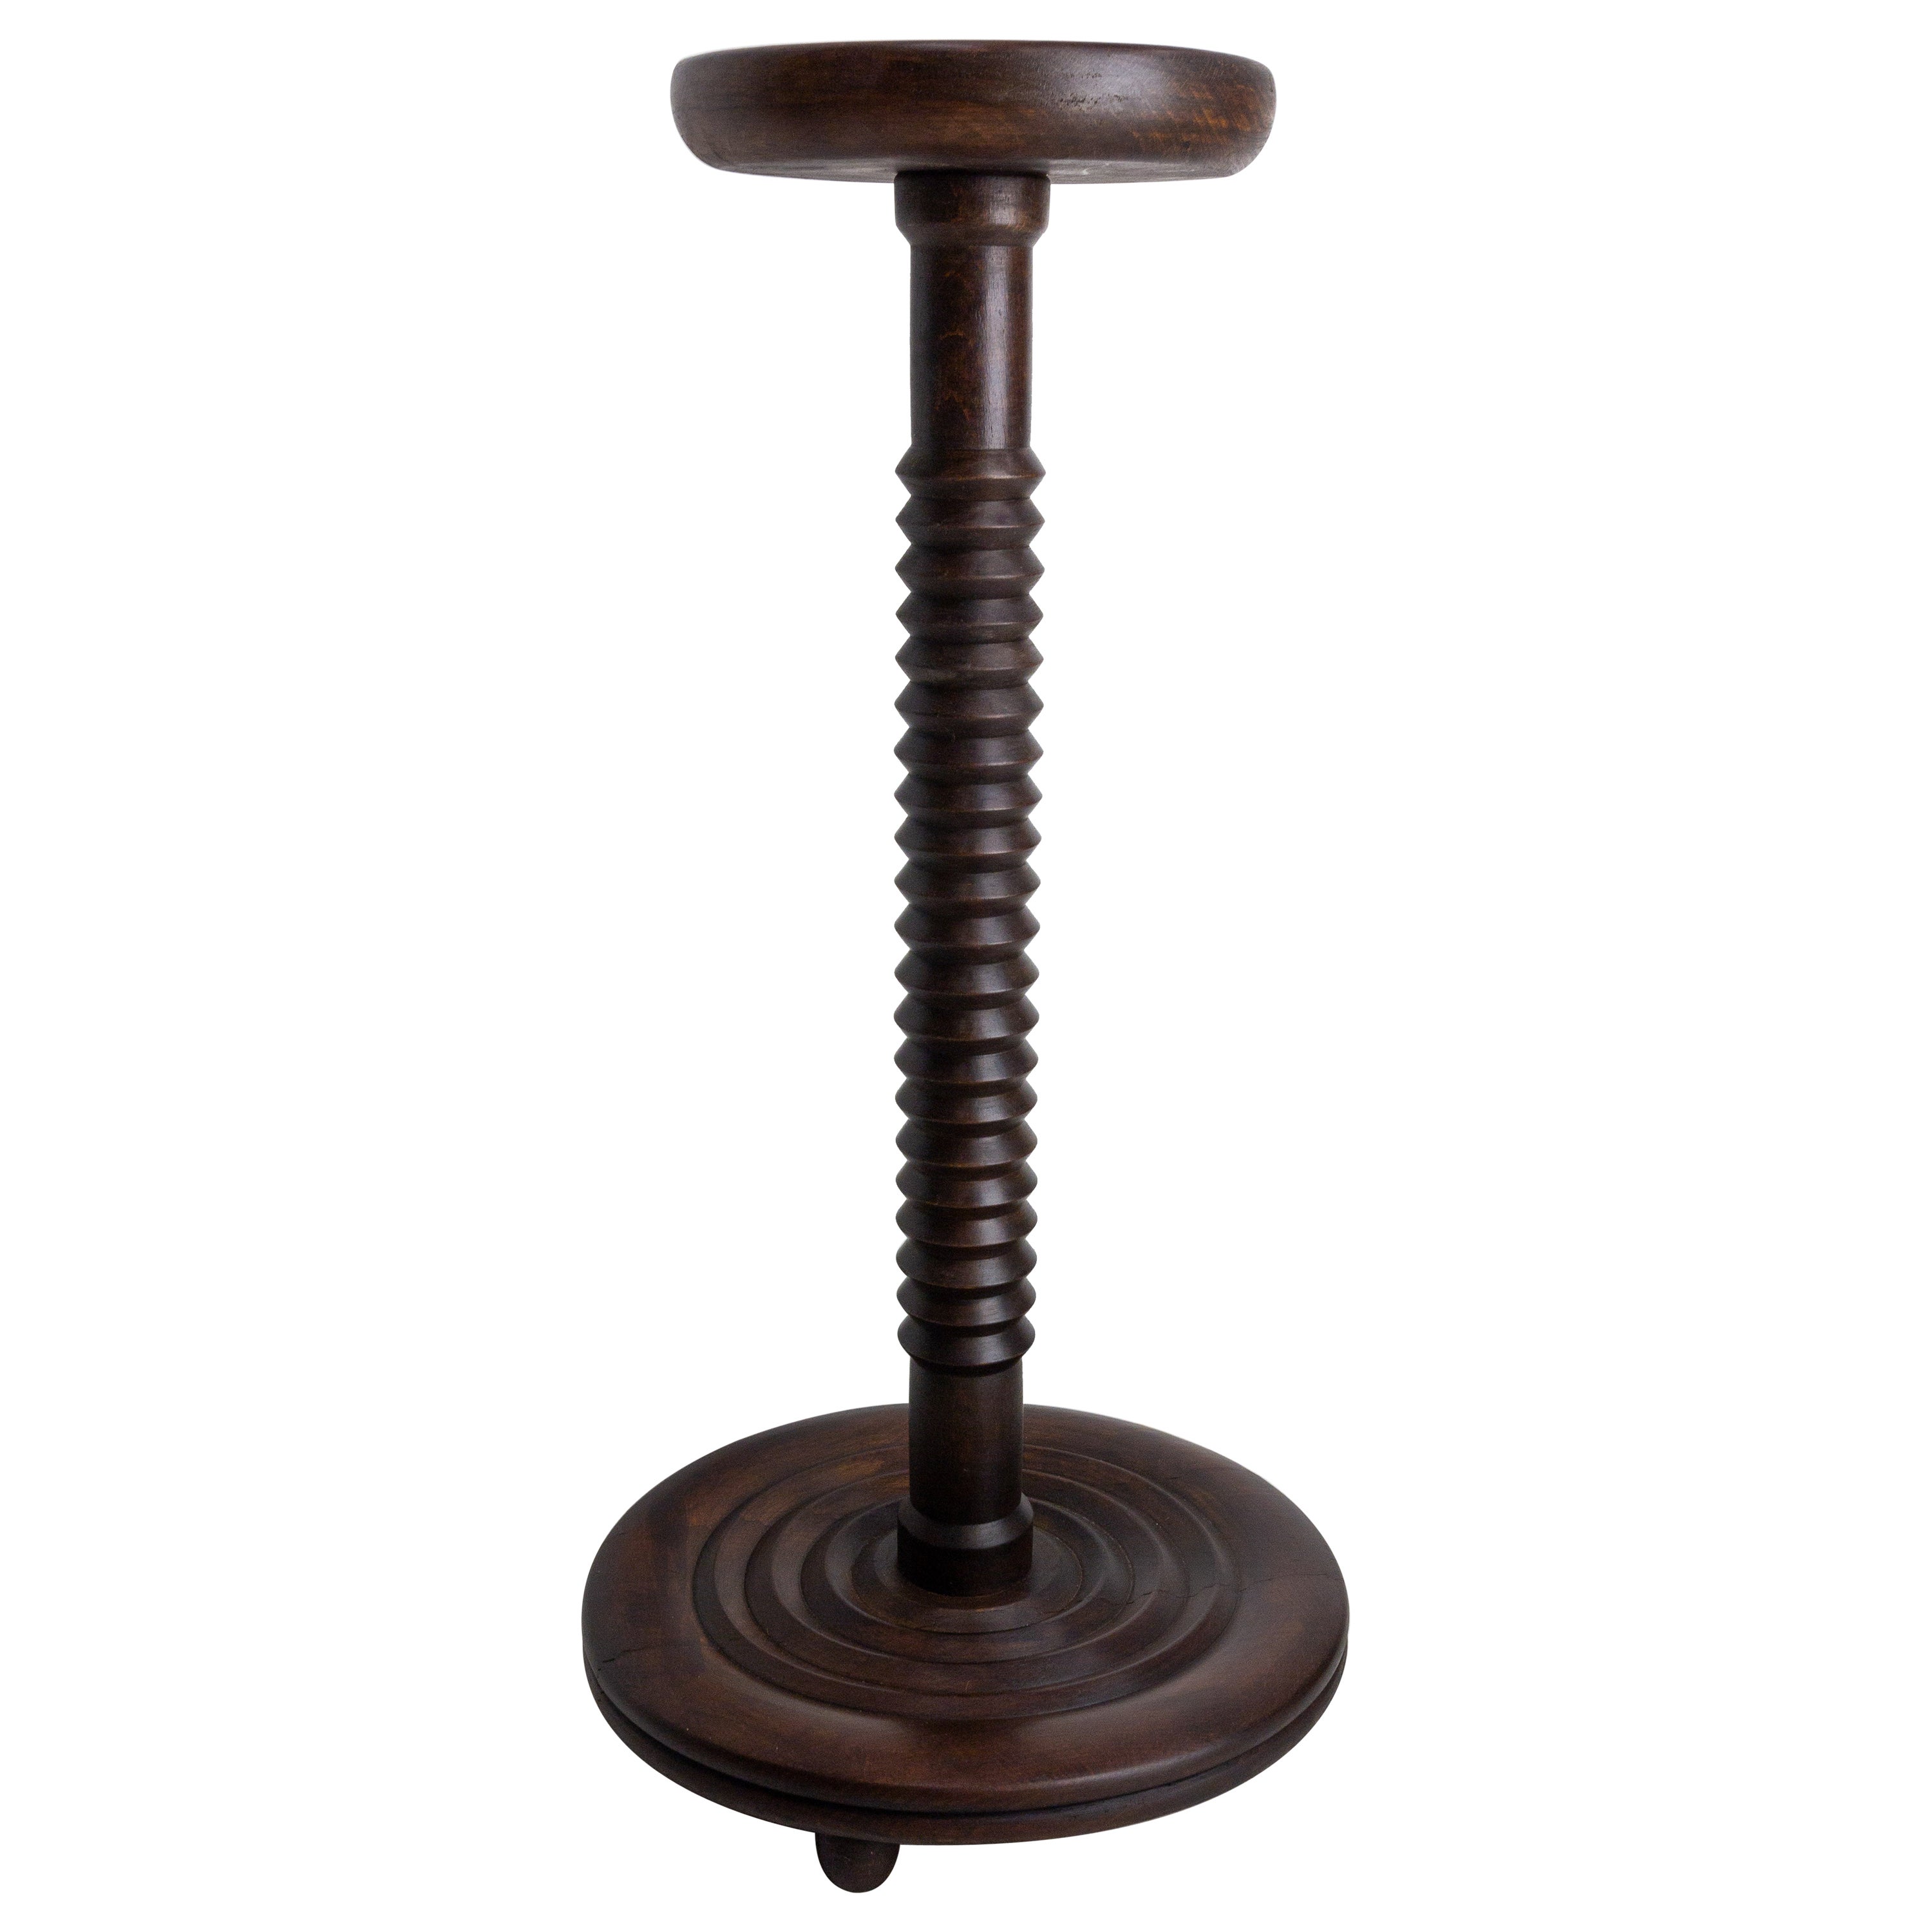 French Mid-Century Pedestal or Plant Holder Walnut Dudouyt Style, circa 1960